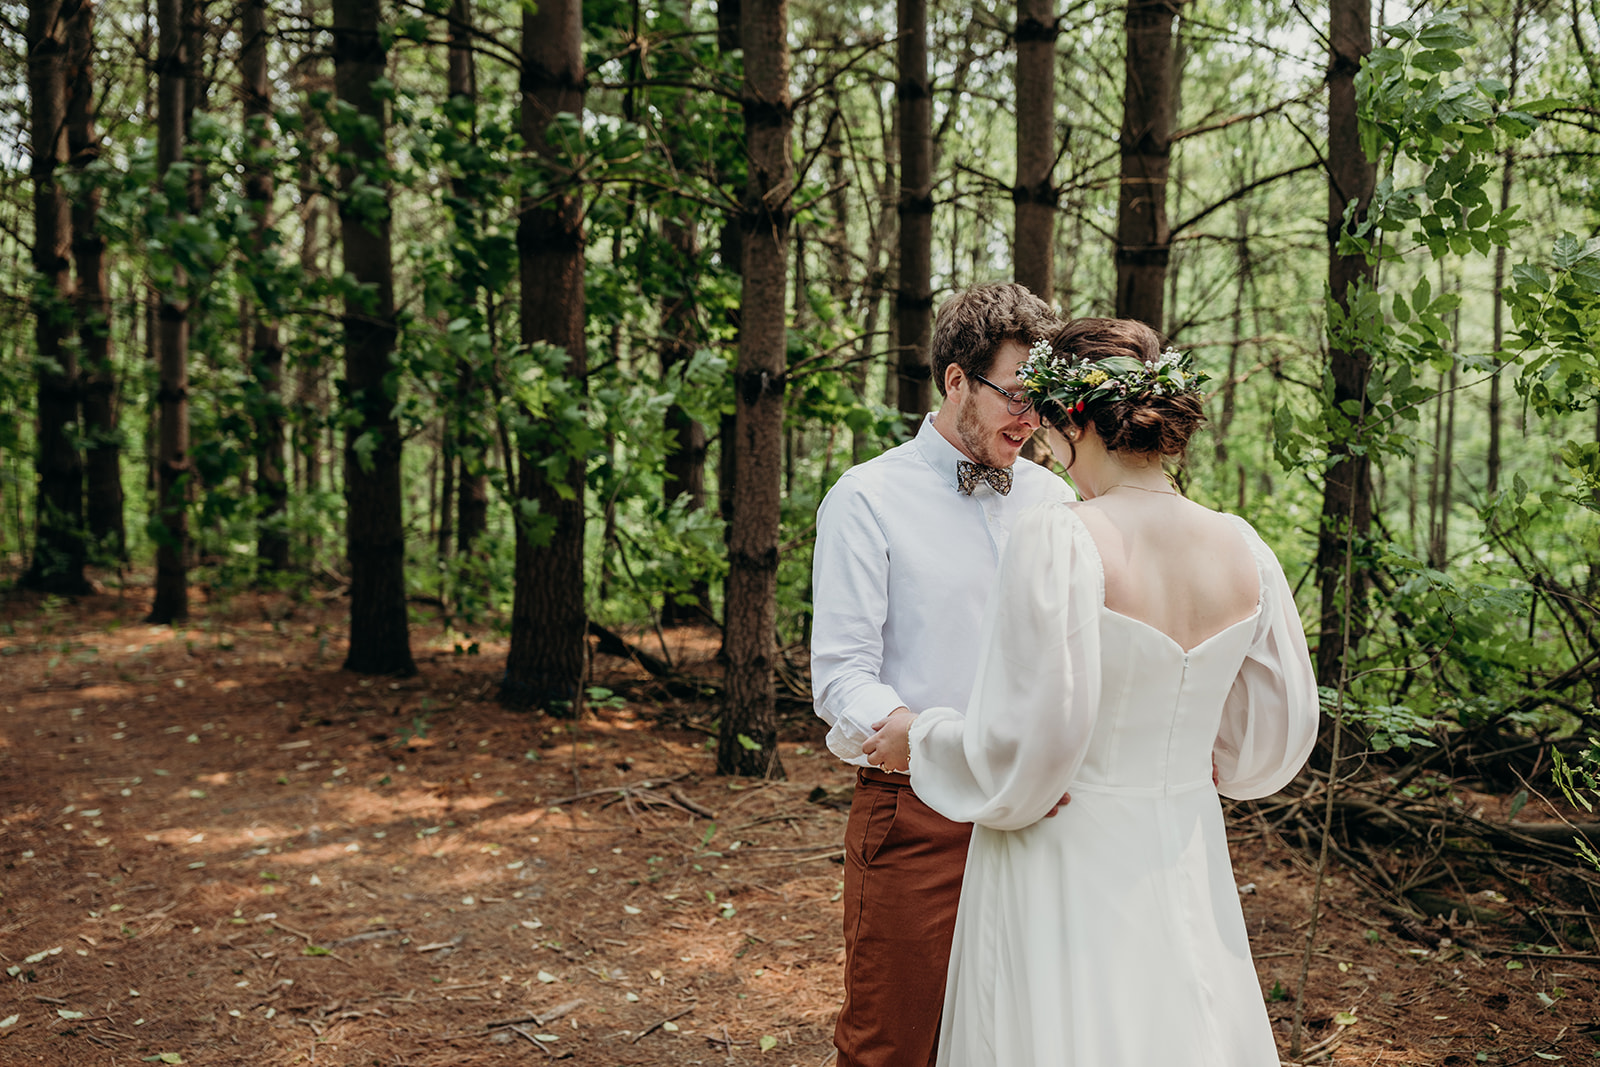 First look in the forest between bride and groom